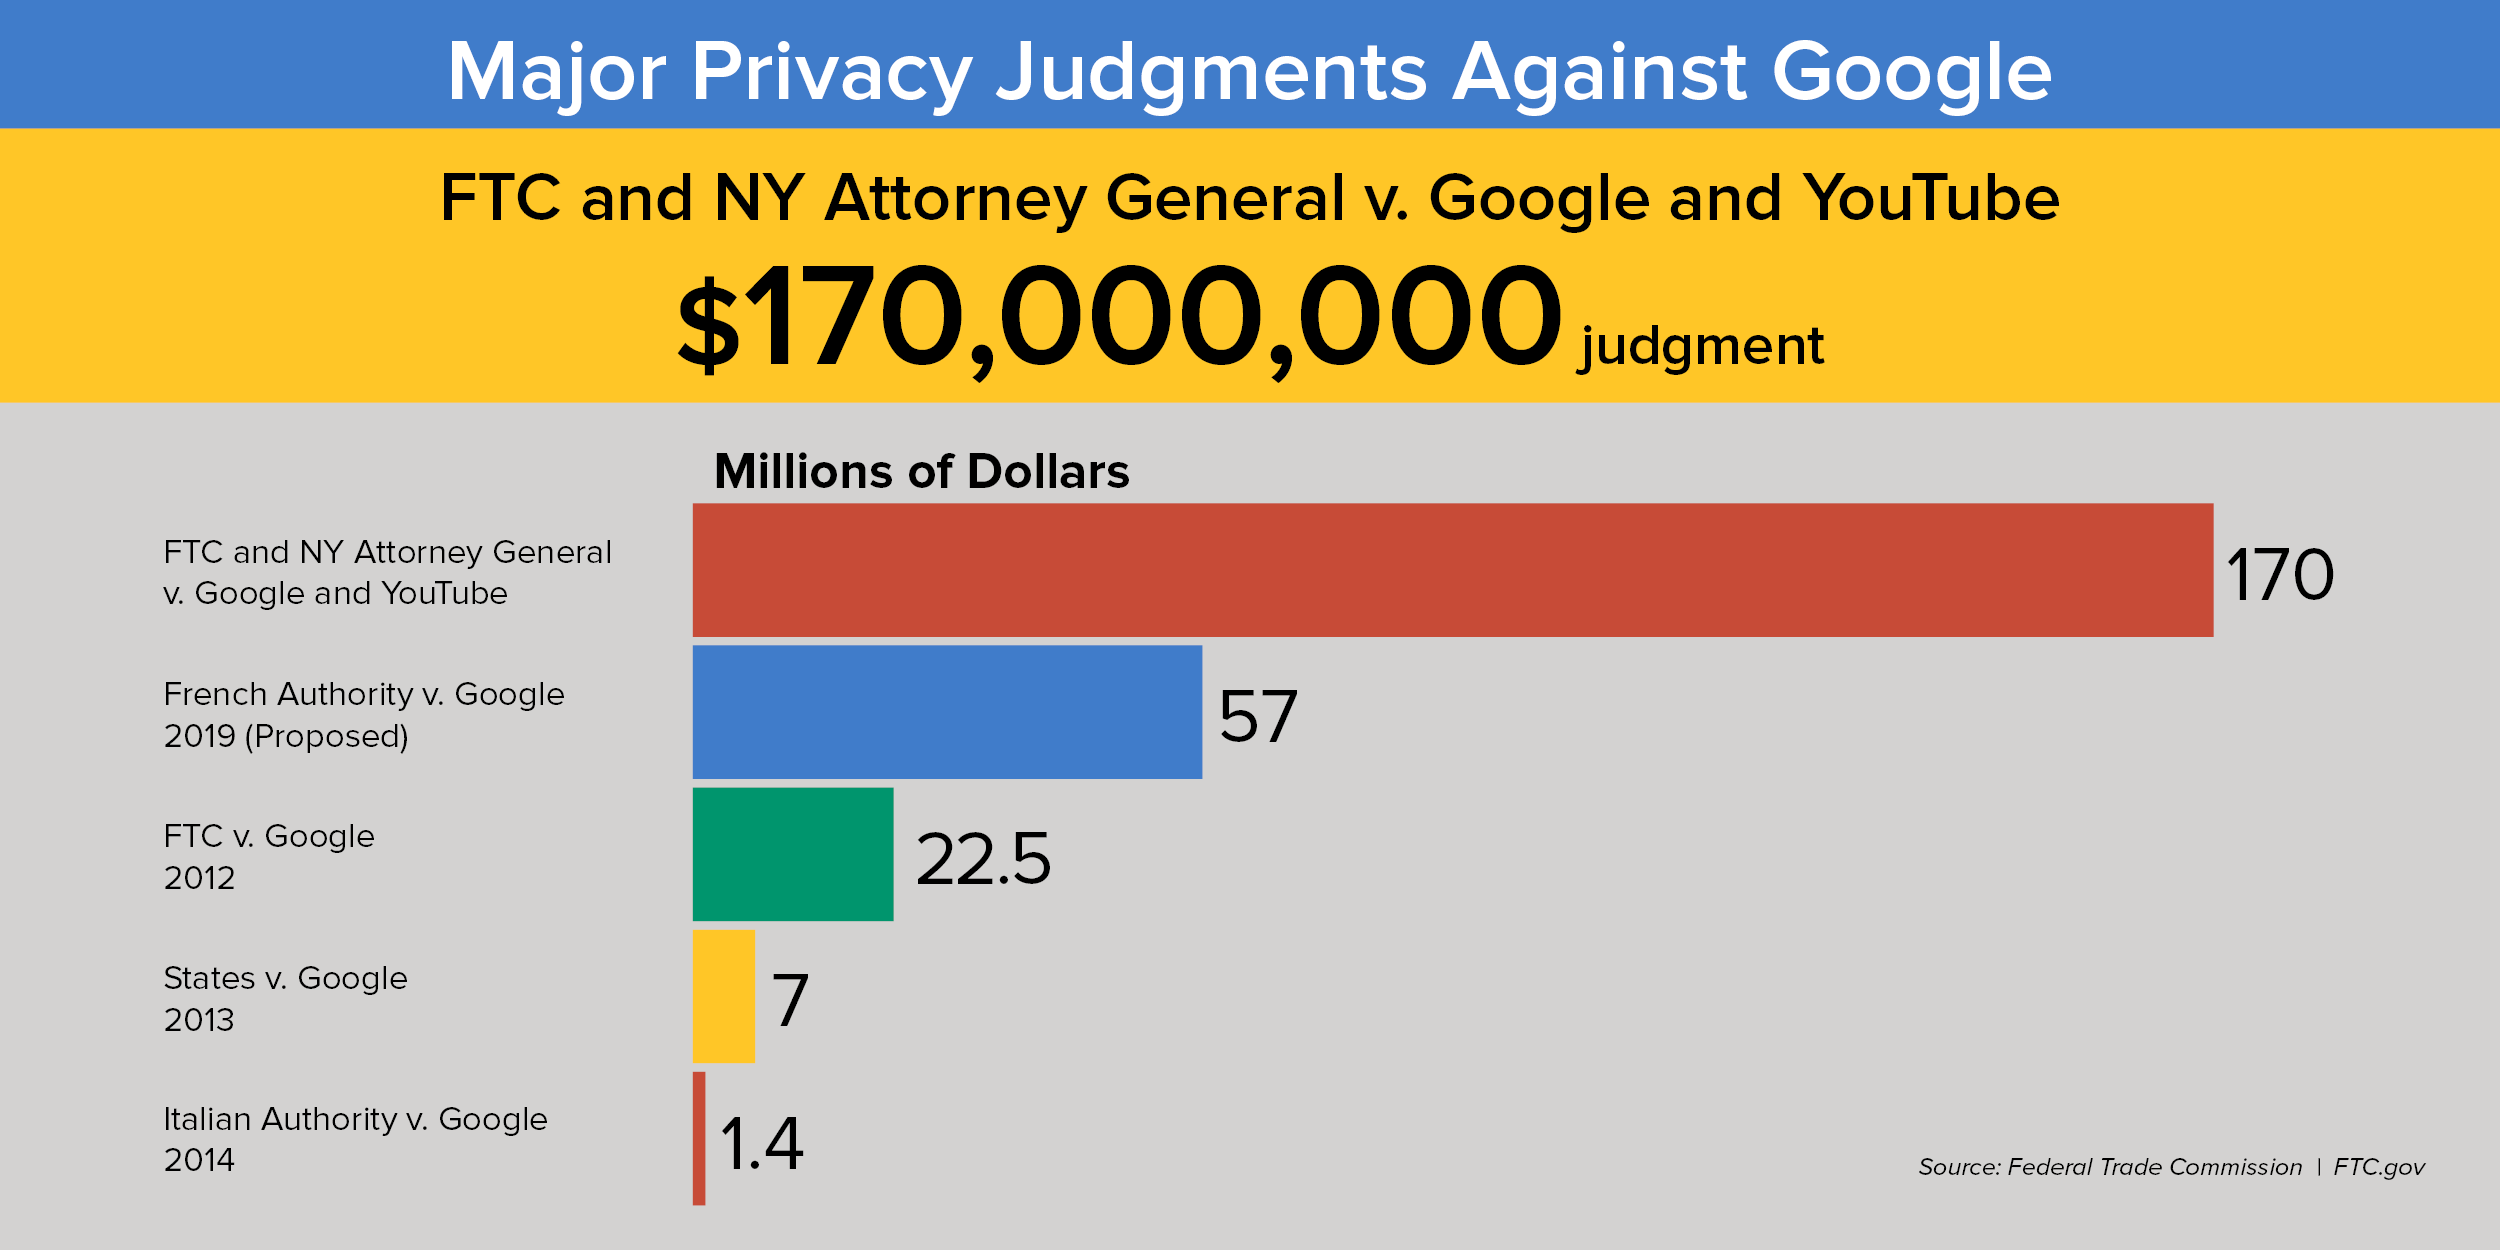 Major Privacy Judgements Against Google - FTC and NY Attorney General v. Google and YouTube ($170 million judgement). French Authority v. Google 2019 (Proposed): 57 million. FTC v. Google 2012: 22.5 million. States v. Google 2013: 7 million. Italian Authority v. Google 2014: 1.4 million